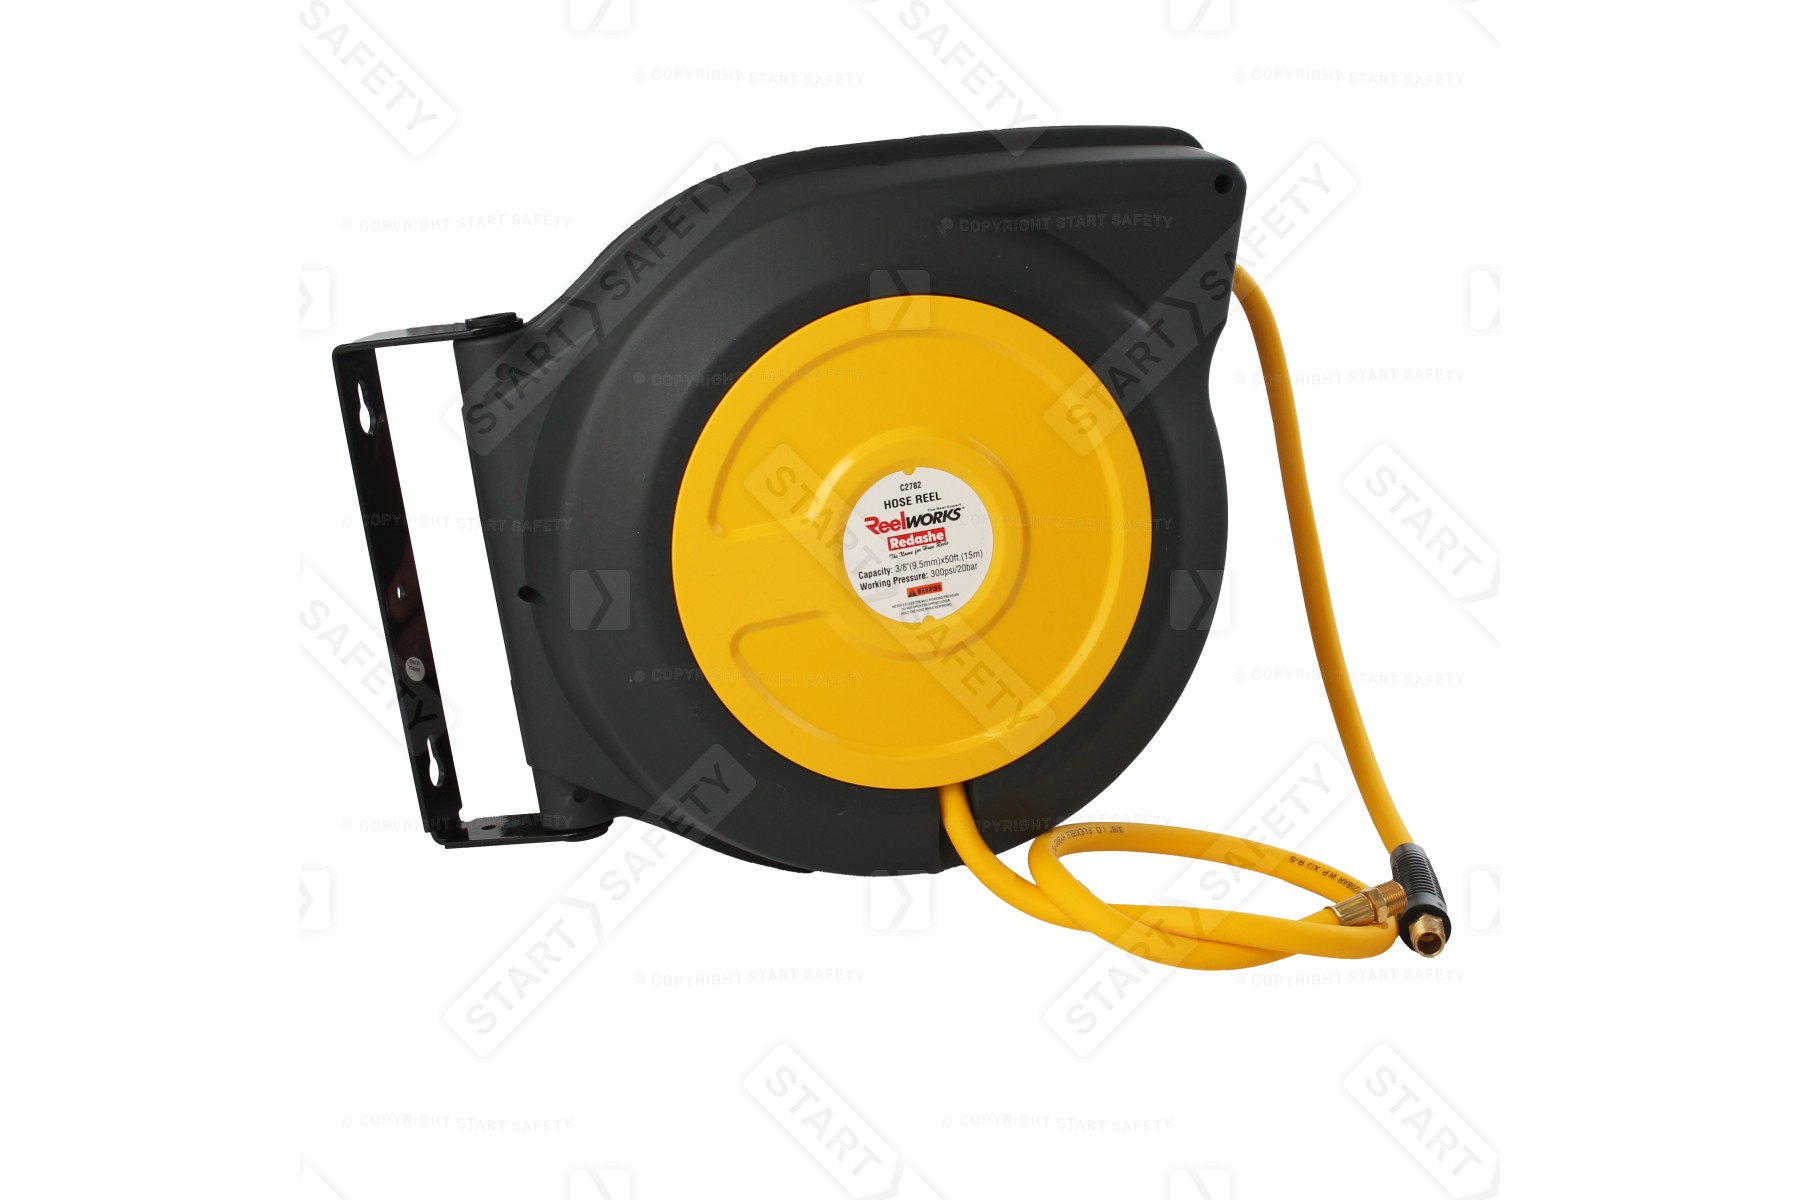 https://startsafety.uk/image/cache/catalog/product-photos/tools/hose-reels/reelworks-airhose-reel/reelworks-retractable-hose-reel-yellow-15m-main-1800x1200.jpg